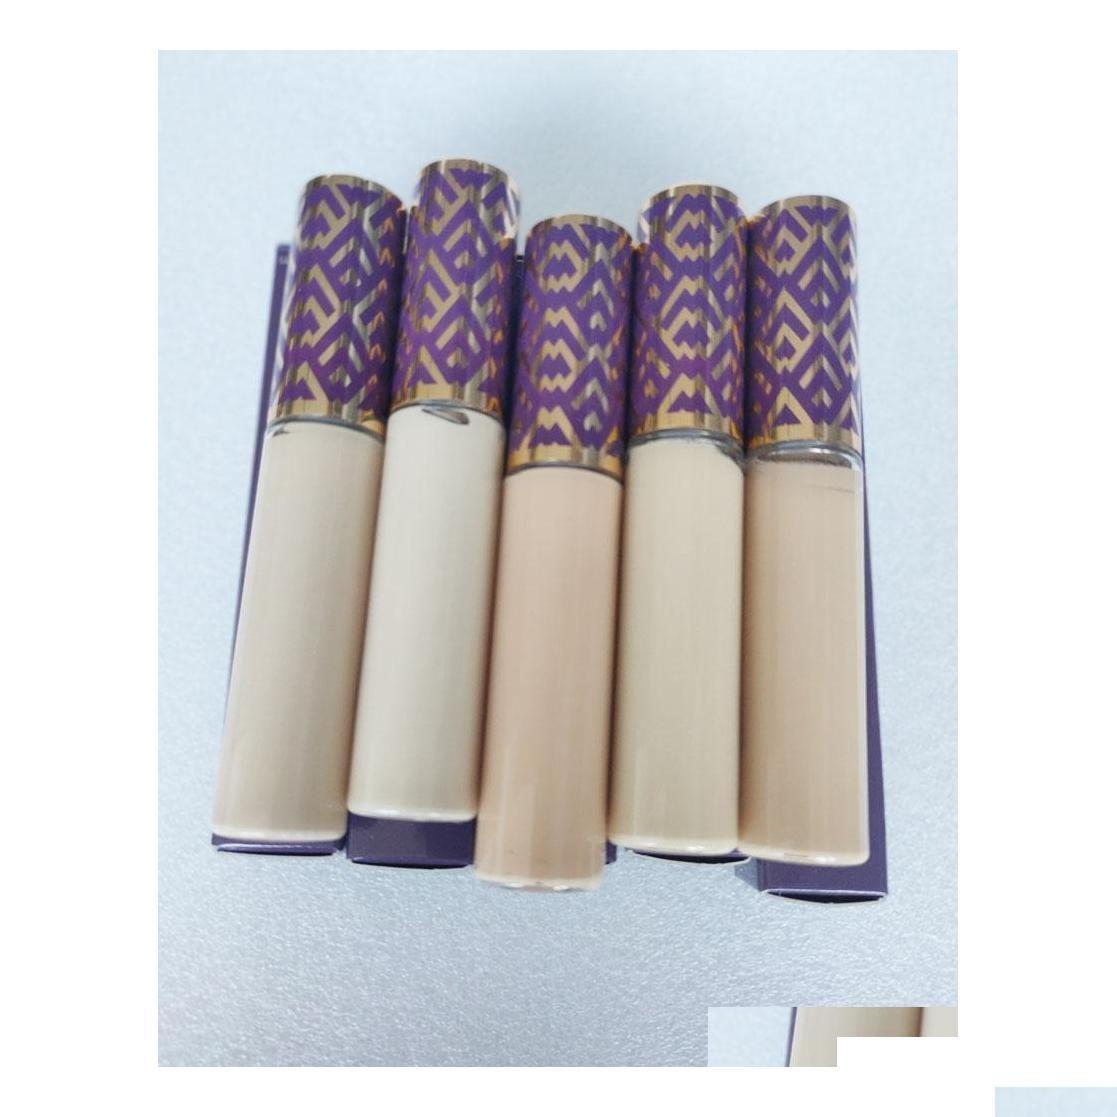 

Foundation High Quality Face Concealer Cream Concealers 5Colors Fair Medium Light Sand 10Ml In Stock Drop Delivery Health Beauty Make Dhpwu, Customize